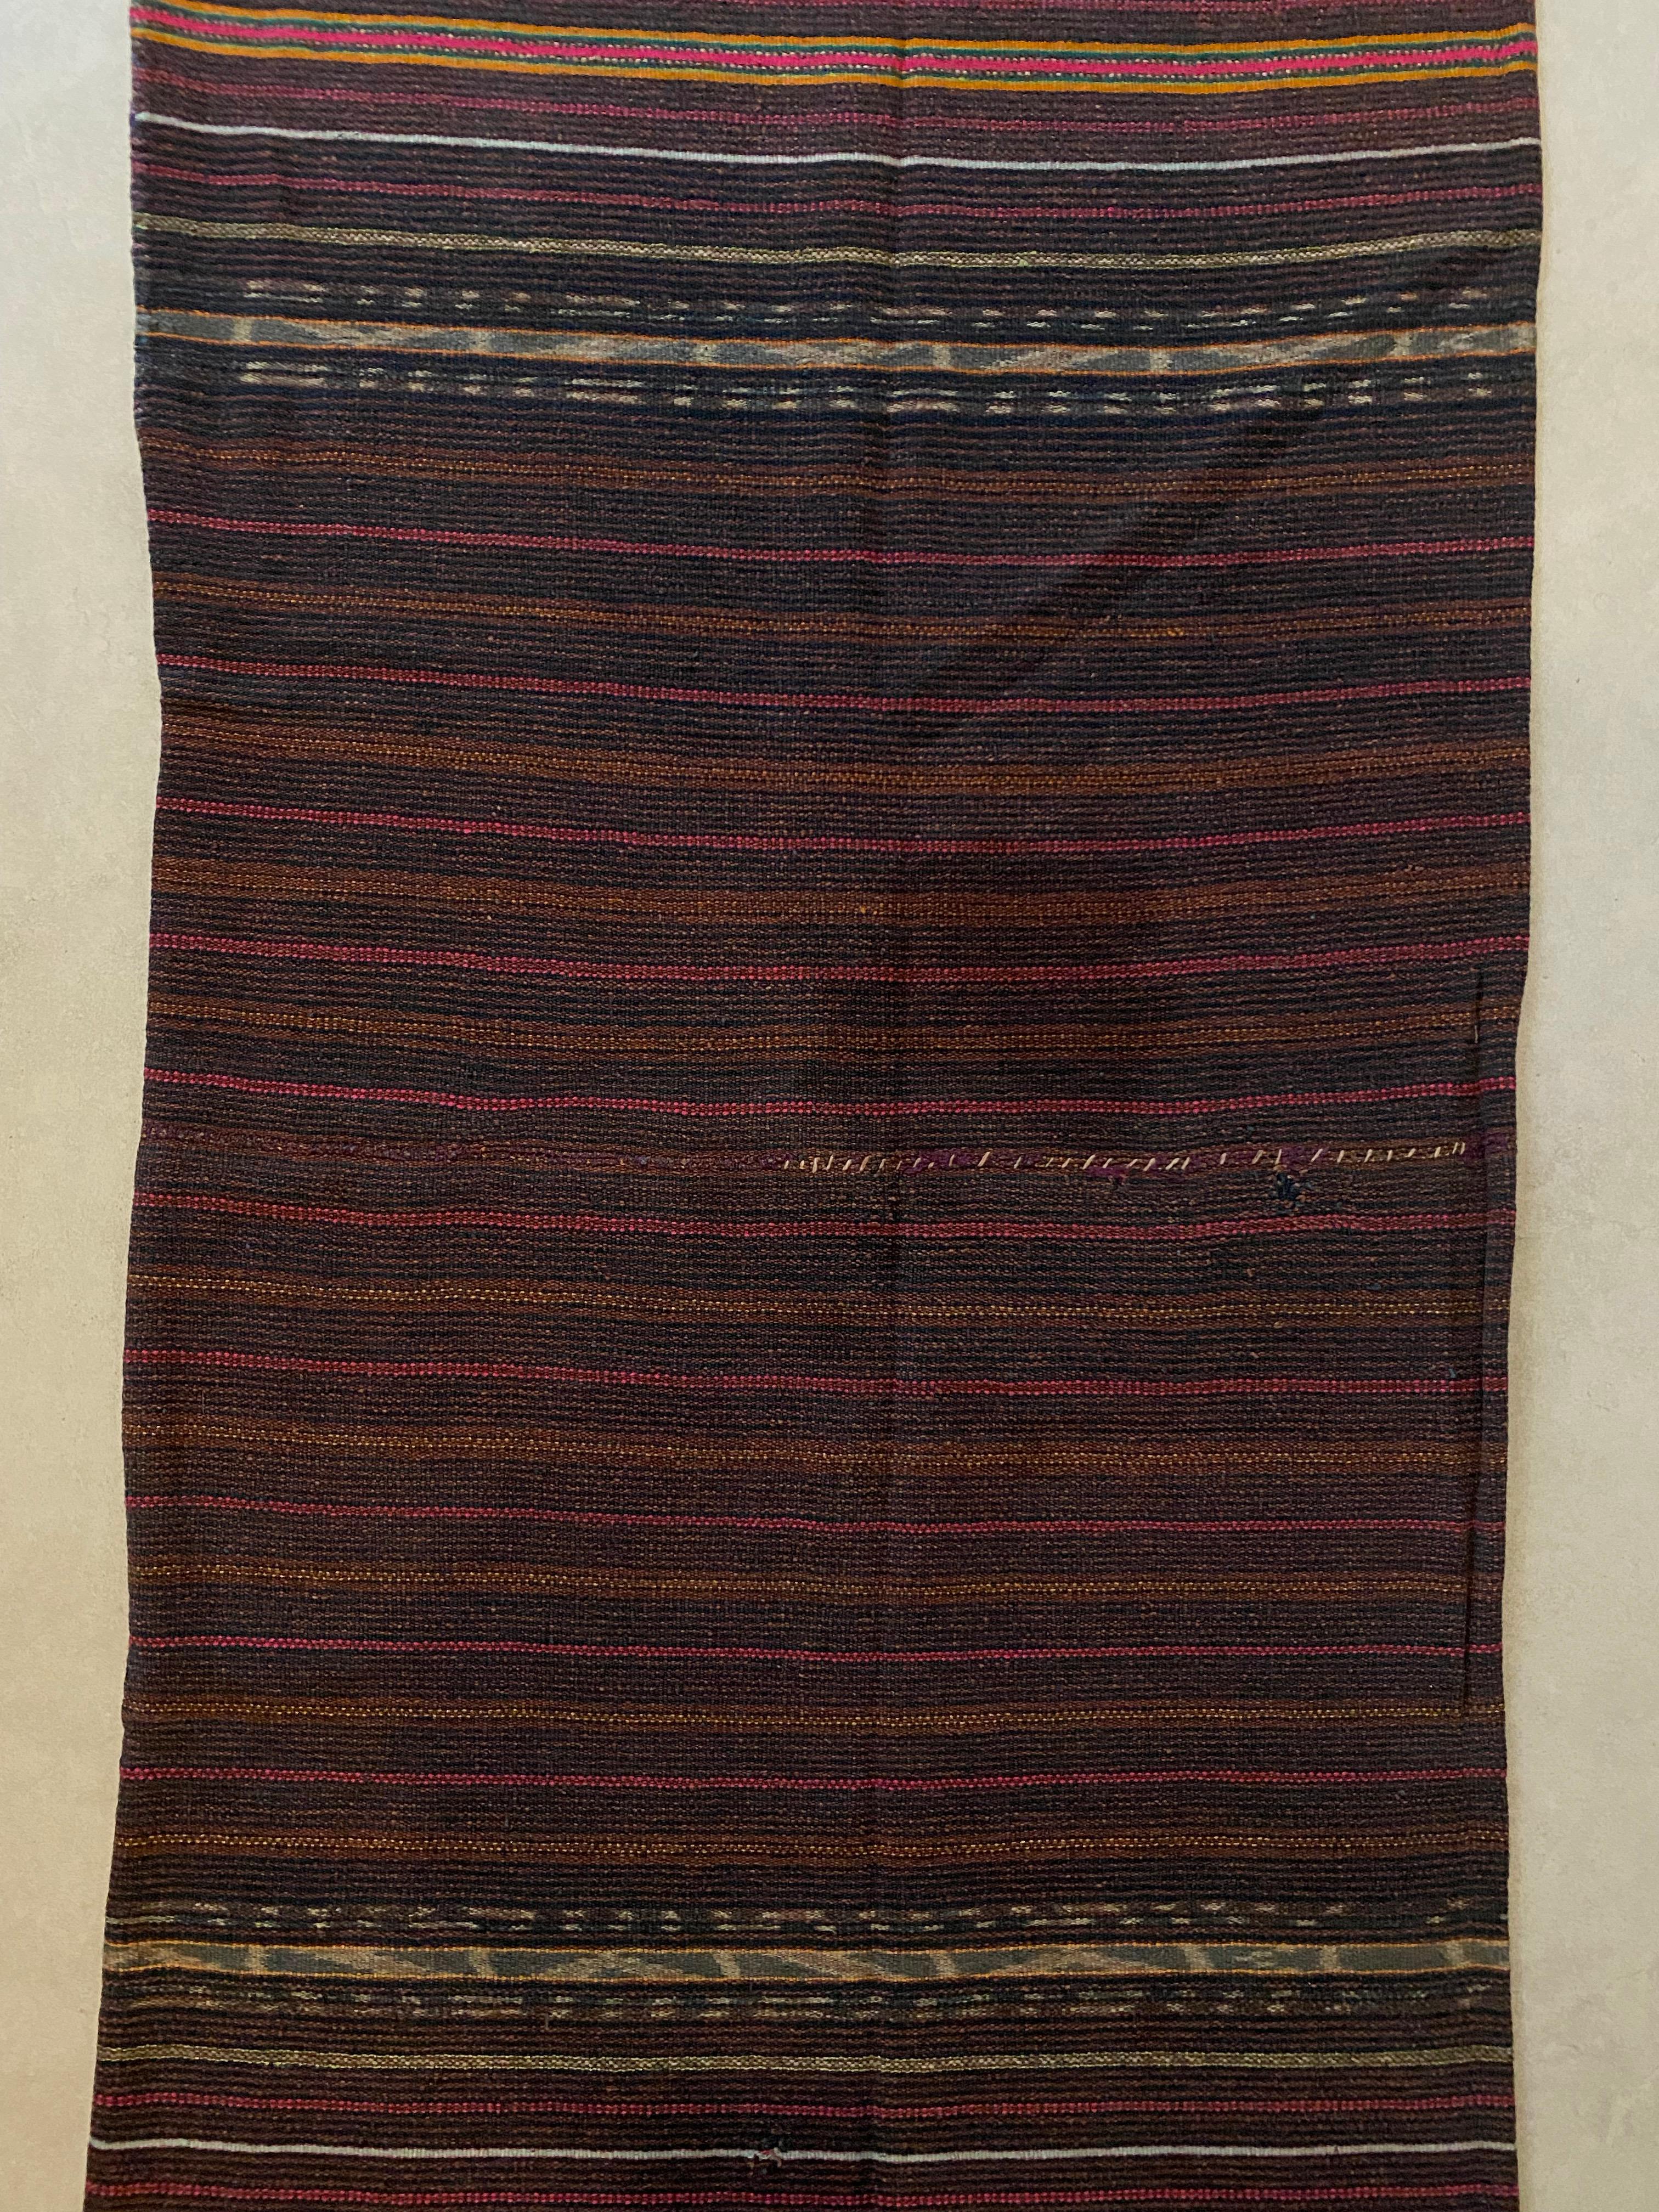 This Ikat textile originates from the Island of Timor, Indonesia. It is hand-woven using naturally dyed yarns via a method passed on through generations. The dark blue foreground brings to life the array of coloured detailing and distinct tribal